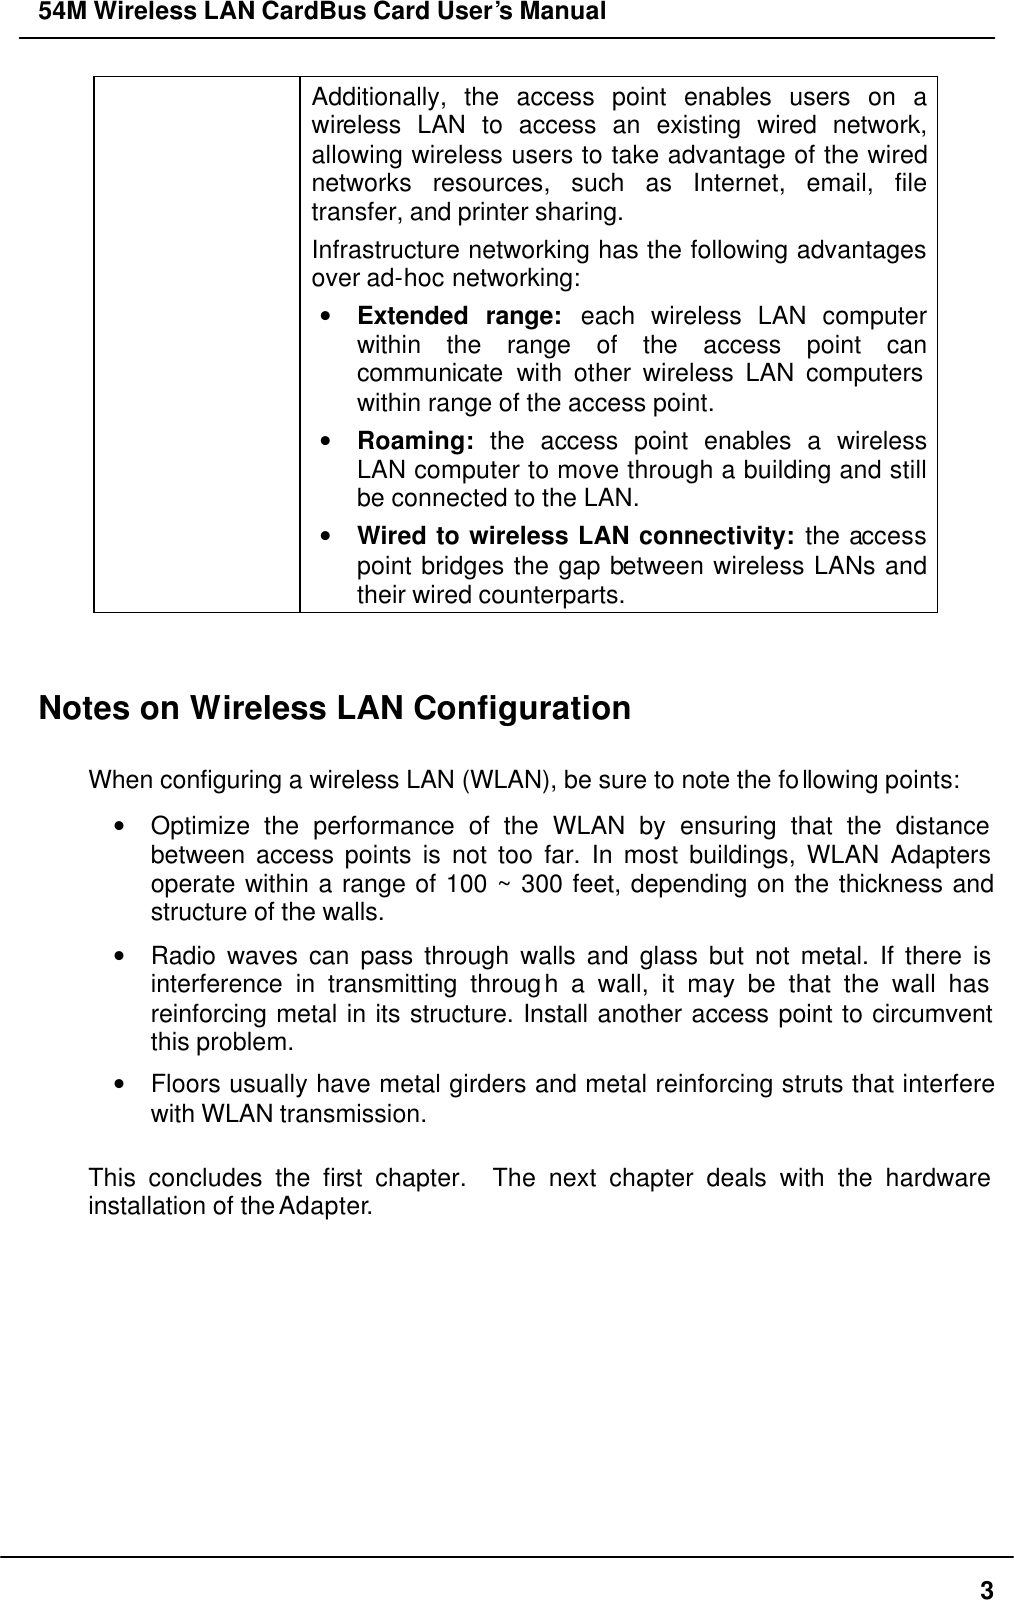 54M Wireless LAN CardBus Card User’s Manual  3 Additionally, the access point enables users on a wireless LAN to access an existing wired network, allowing wireless users to take advantage of the wired networks resources, such as Internet, email, file transfer, and printer sharing.   Infrastructure networking has the following advantages over ad-hoc networking: • Extended range: each wireless LAN computer within the range of the access point can communicate with other wireless LAN computers within range of the access point. • Roaming: the access point enables a wireless LAN computer to move through a building and still be connected to the LAN. • Wired to wireless LAN connectivity: the access point bridges the gap between wireless LANs and their wired counterparts.   Notes on Wireless LAN Configuration  When configuring a wireless LAN (WLAN), be sure to note the following points: • Optimize the performance of the WLAN by ensuring that the distance between access points is not too far. In most buildings, WLAN Adapters operate within a range of 100 ~ 300 feet, depending on the thickness and structure of the walls.   • Radio waves can pass through walls and glass but not metal. If there is interference in transmitting through a wall, it may be that the wall has reinforcing metal in its structure. Install another access point to circumvent this problem. • Floors usually have metal girders and metal reinforcing struts that interfere with WLAN transmission.  This concludes the first chapter.  The next chapter deals with the hardware installation of the Adapter.    